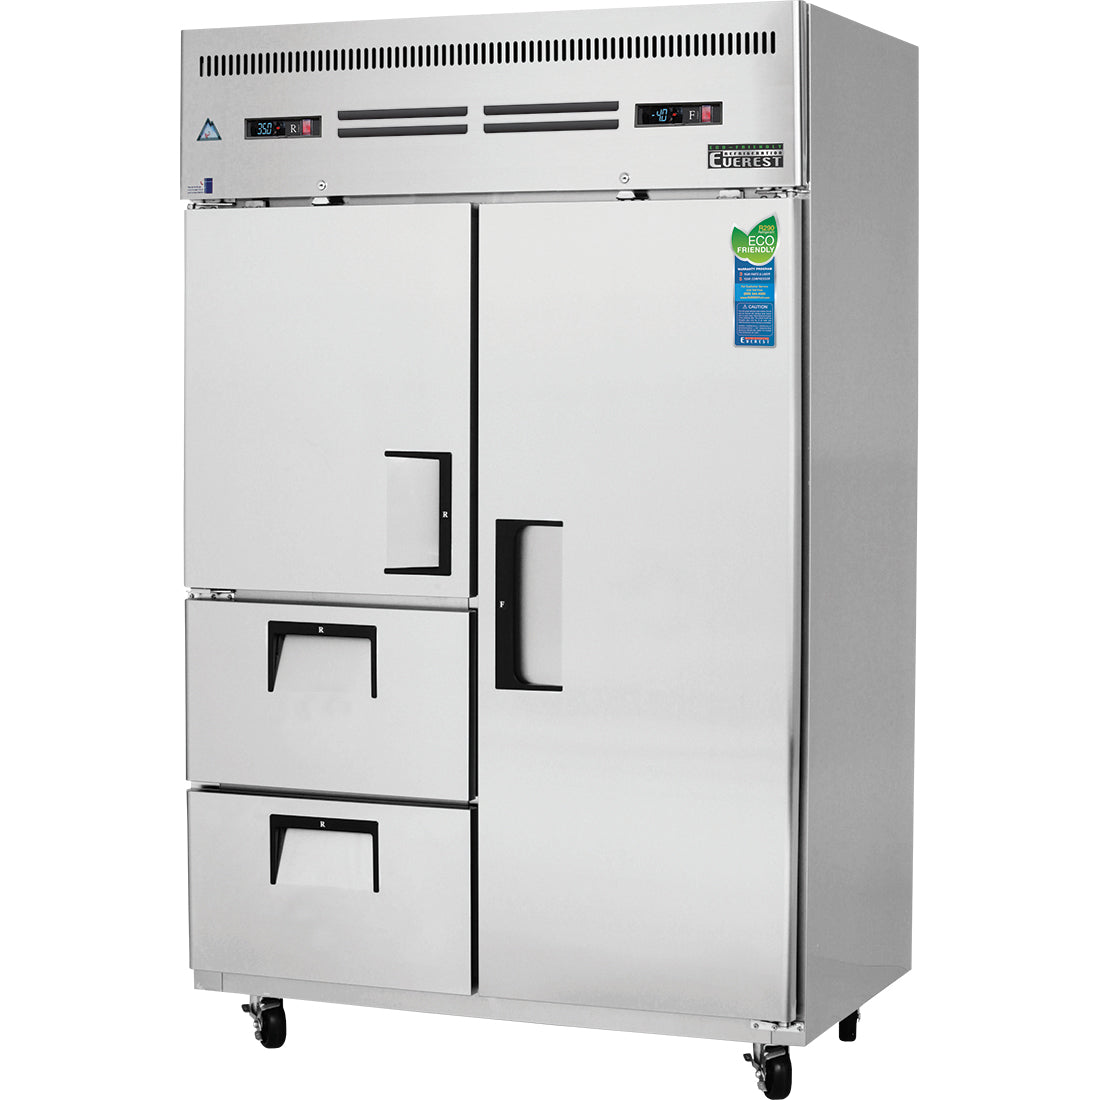 Everest ES Series-ESRF2D2 Two Section Full/Half Door and Drawer Combo Upright Reach-In Dual Temperature Refrigerator/Freezer Combo